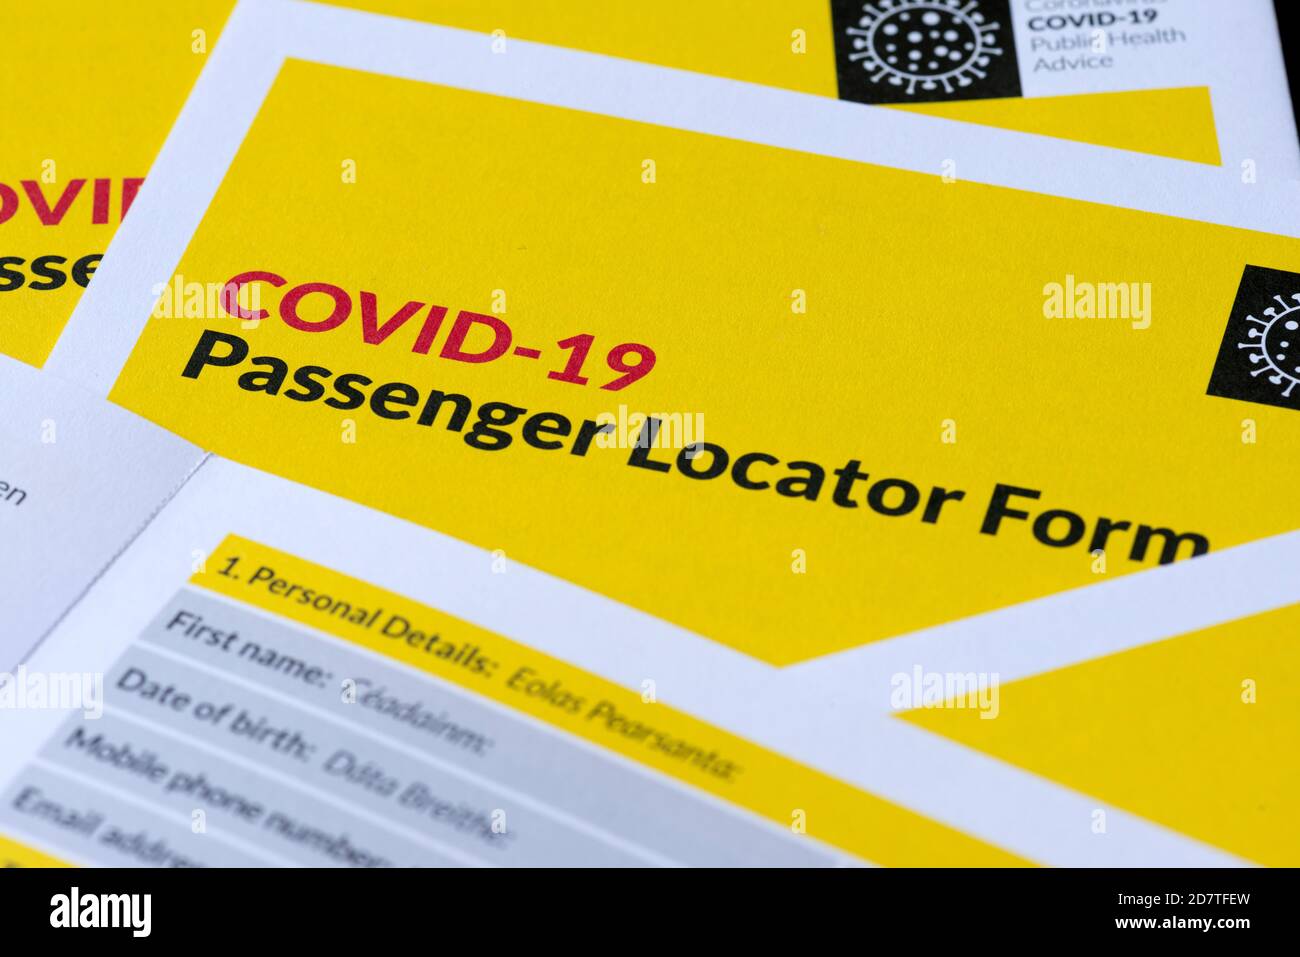 Close up Covid 19 Passenger Locator Form for arriving in Republic of Ireland from abroad due to the Coronavirus Covid 19 pandemic outbreak in Ireland Stock Photo